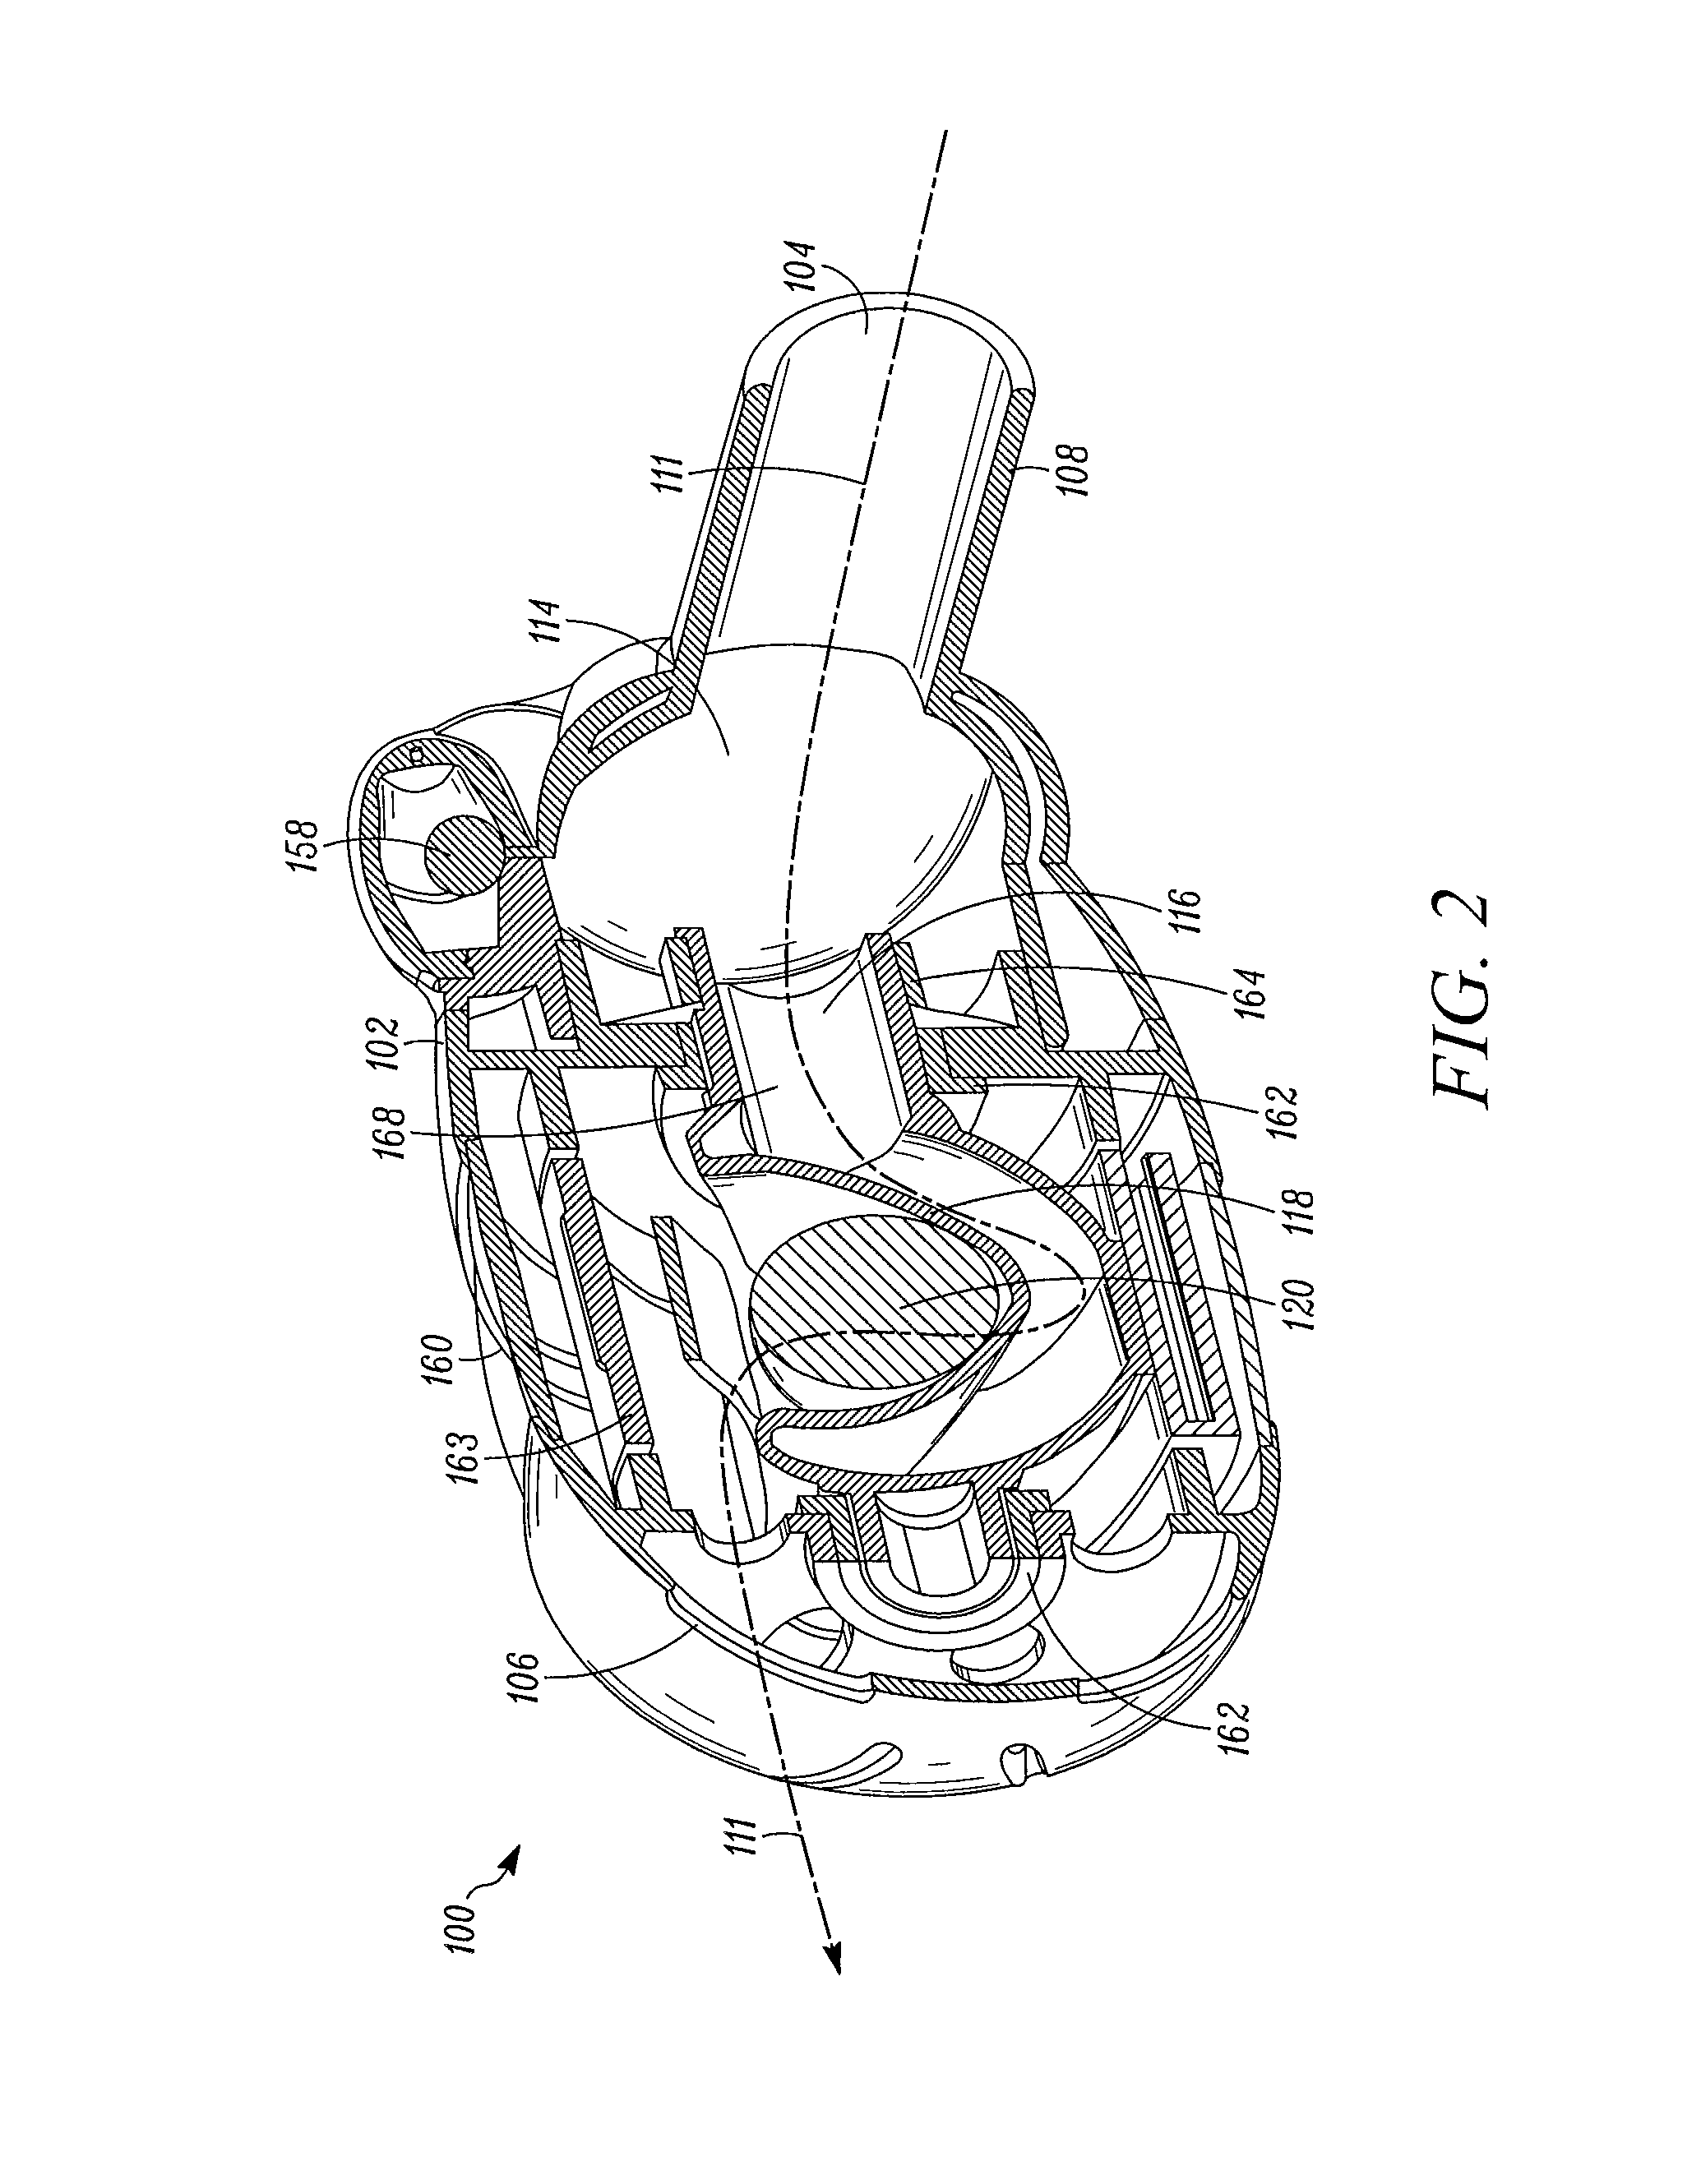 Method and device for performing orientation dependent oscillating positive expiratory pressure therapy